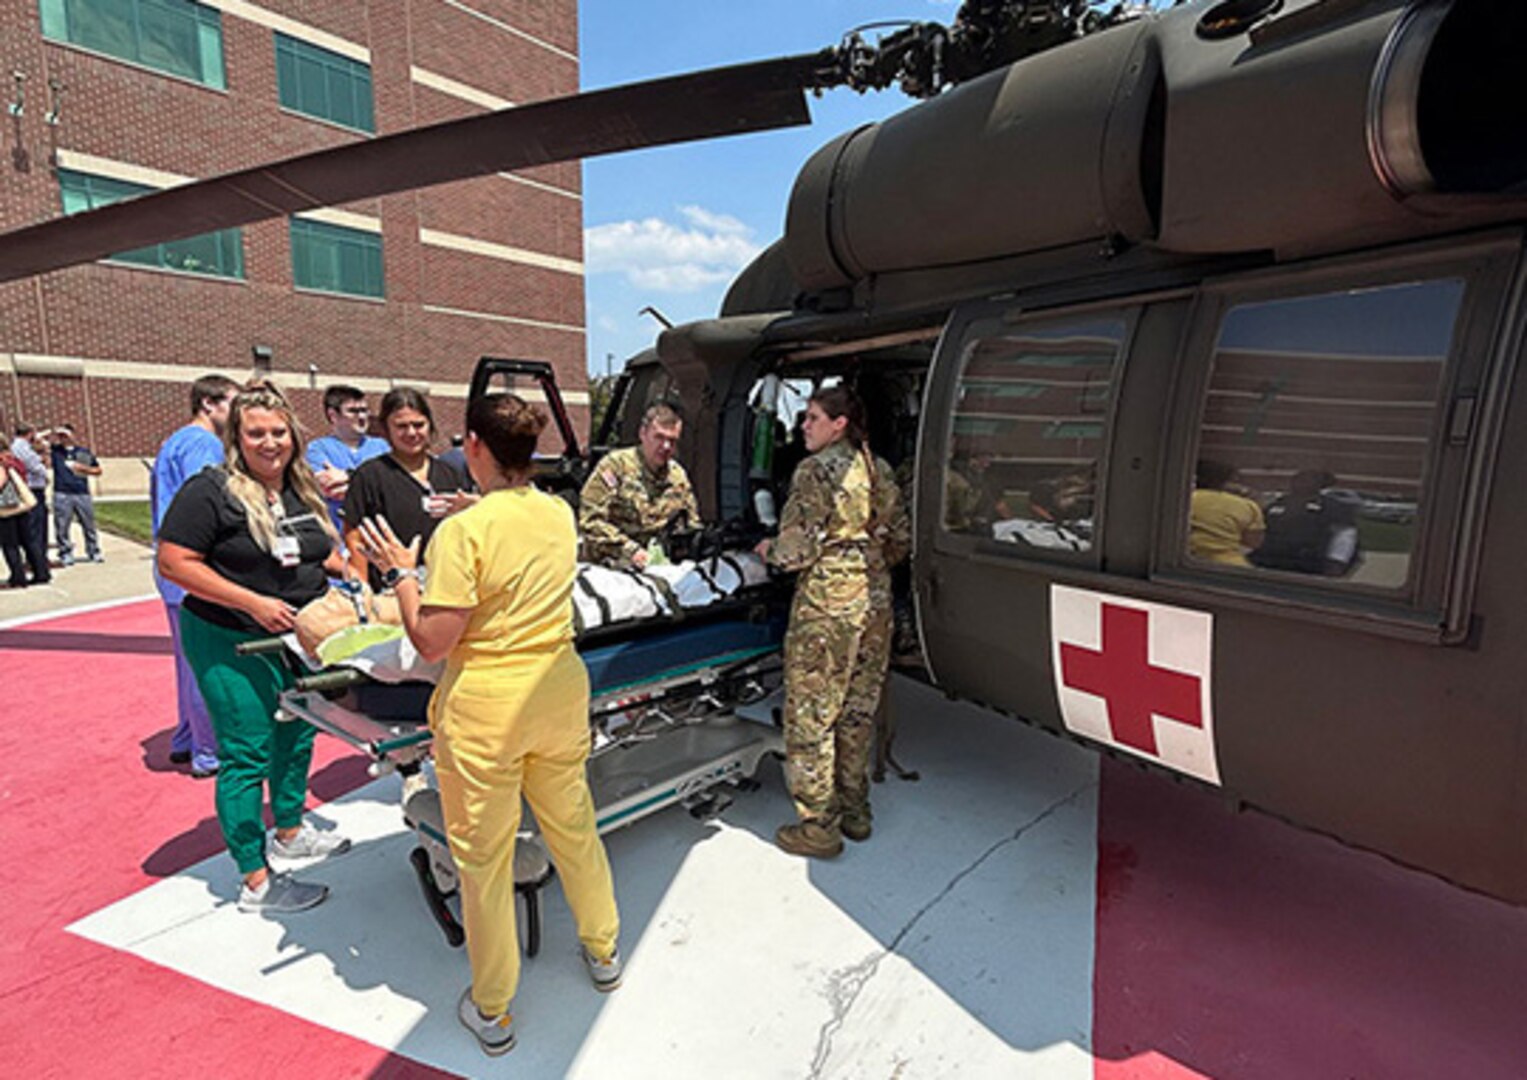 Aurora BayCare Medical Center professionals and Soldiers from the medevac assets of the Wisconsin Army National Guard’s 1st Battalion, 147th Aviation Regiment unload a mock patient from a UH-60 Black Hawk helicopter at Aurora BayCare Medical Center in Green Bay, Wis., June 22.